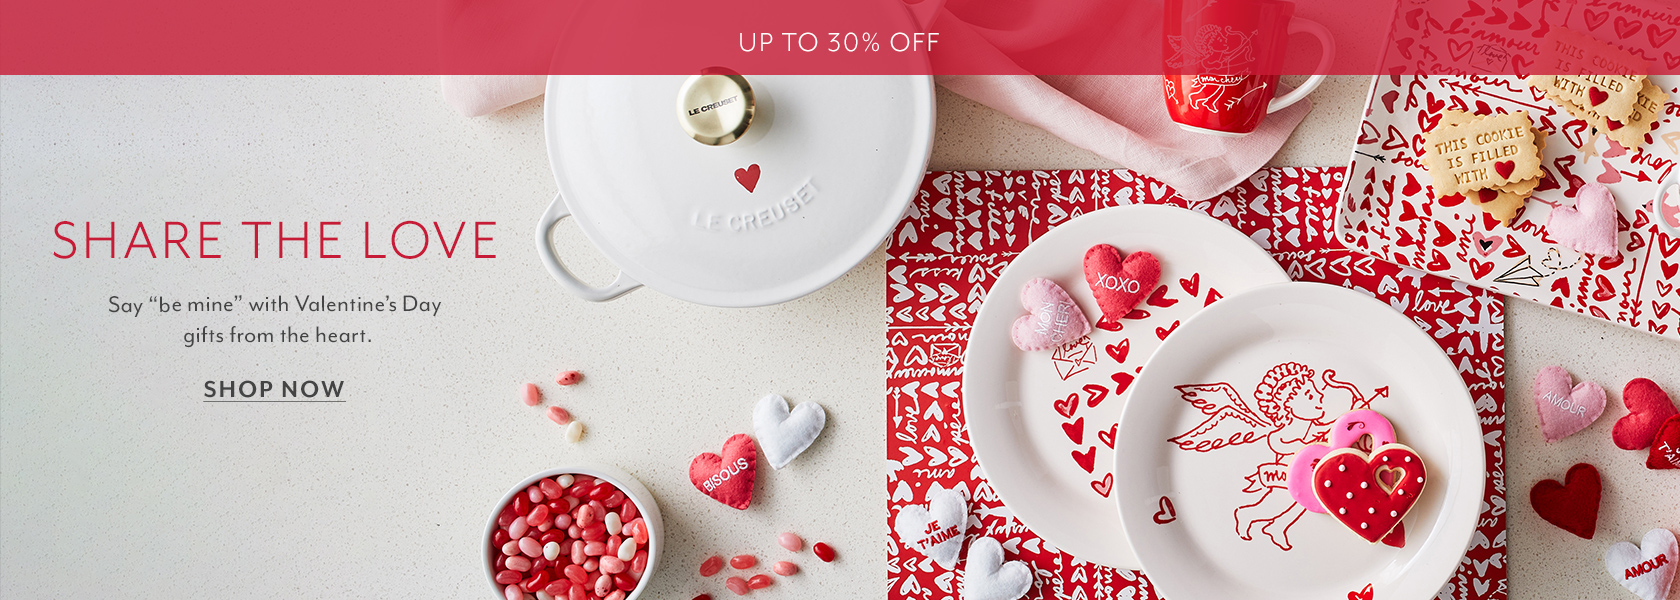 Up to 30% off. Share the love. Say Be Mine with Valentine's Day gifts from the Heart. Shop Now. White Le Creuset with red heart on lid.